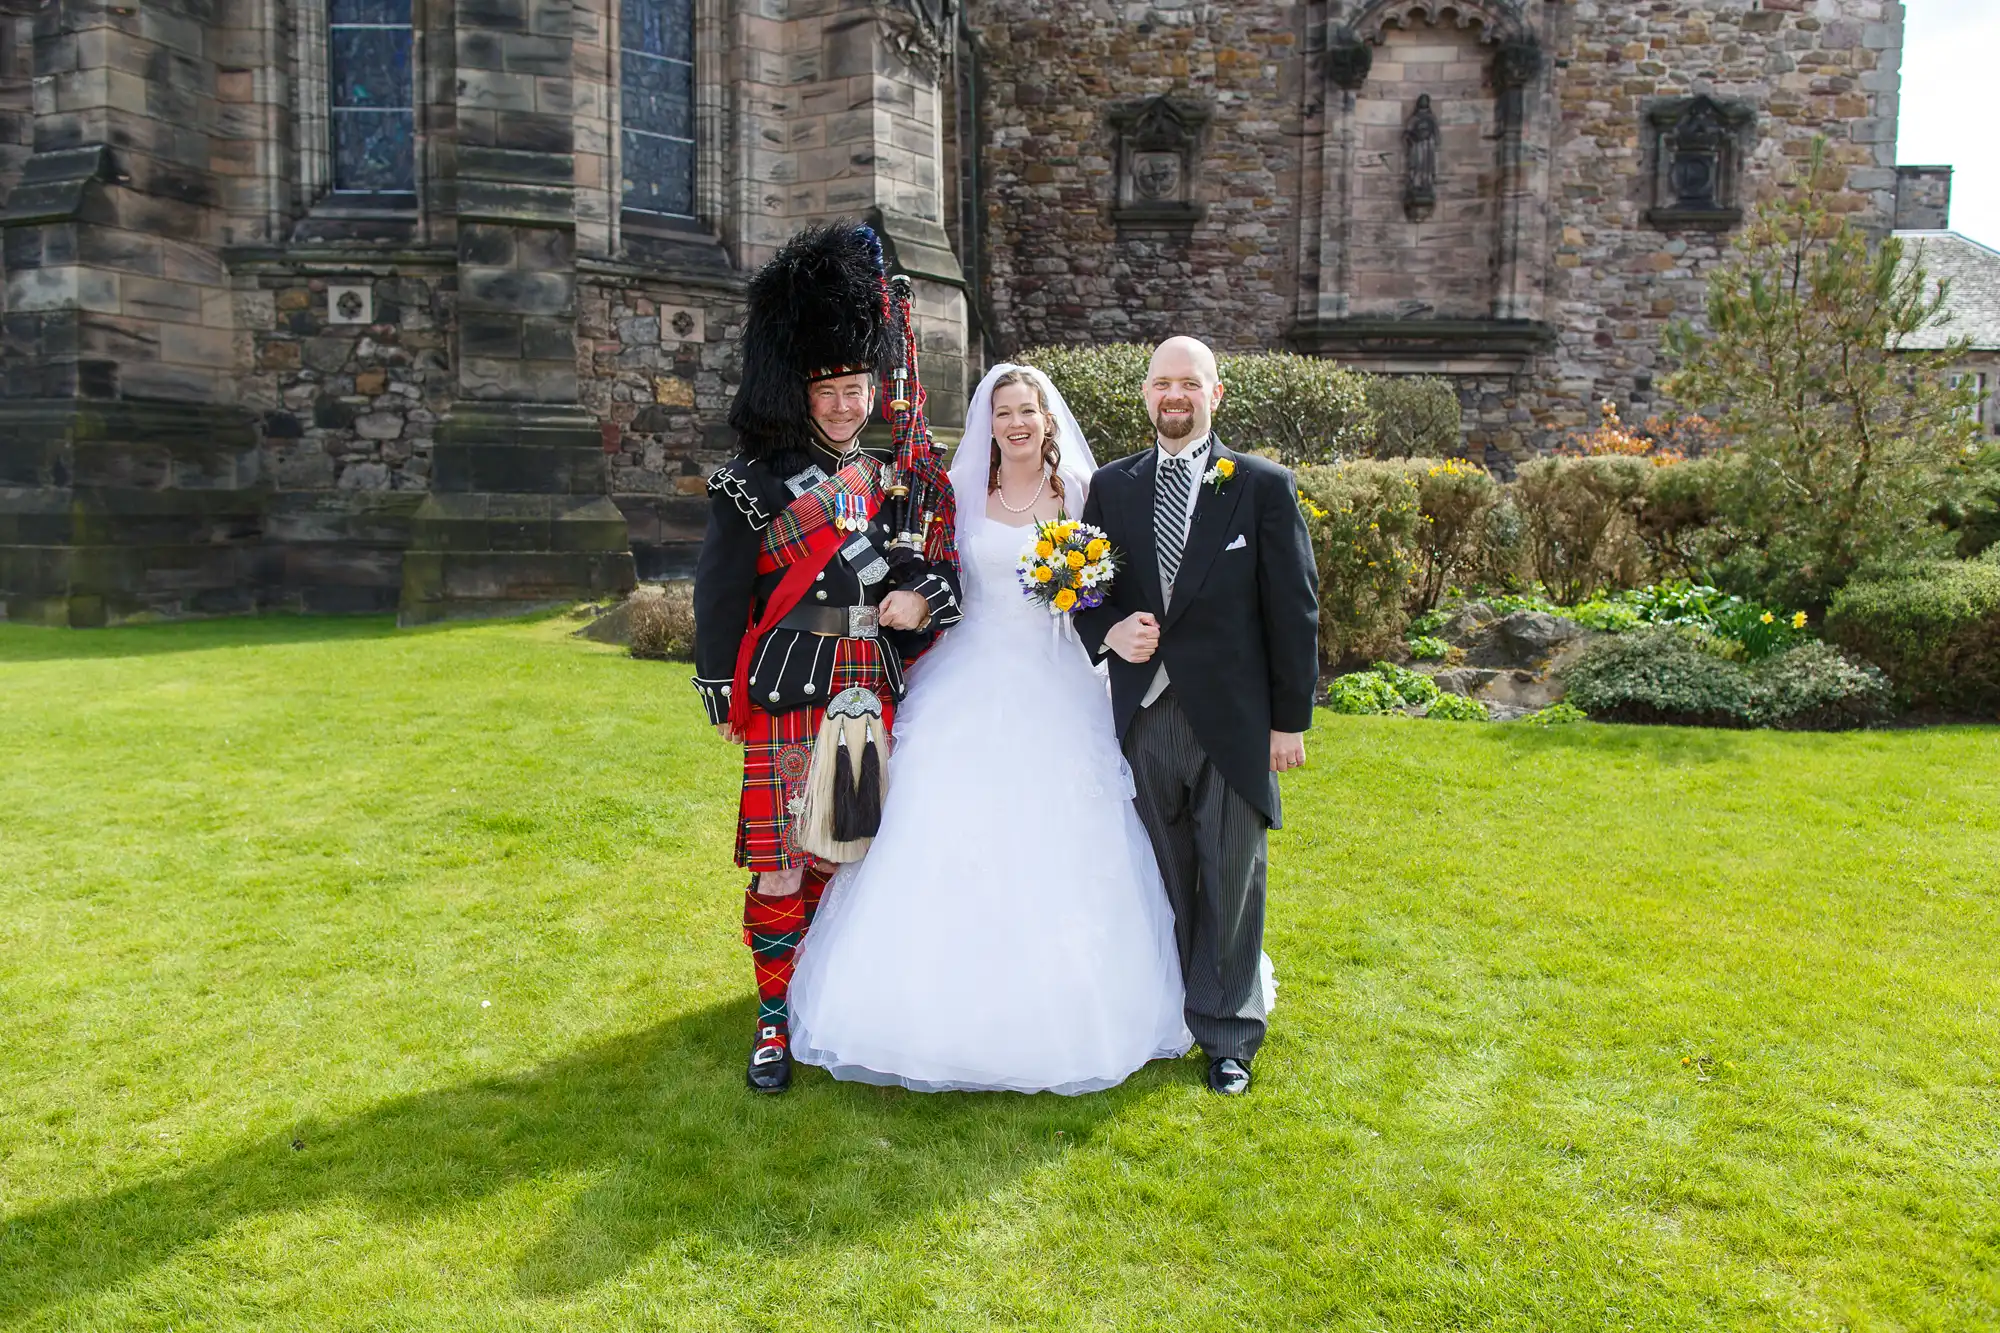 A bride and groom smiling with a bagpiper in traditional scottish attire, standing on a grassy field beside a historic stone building.